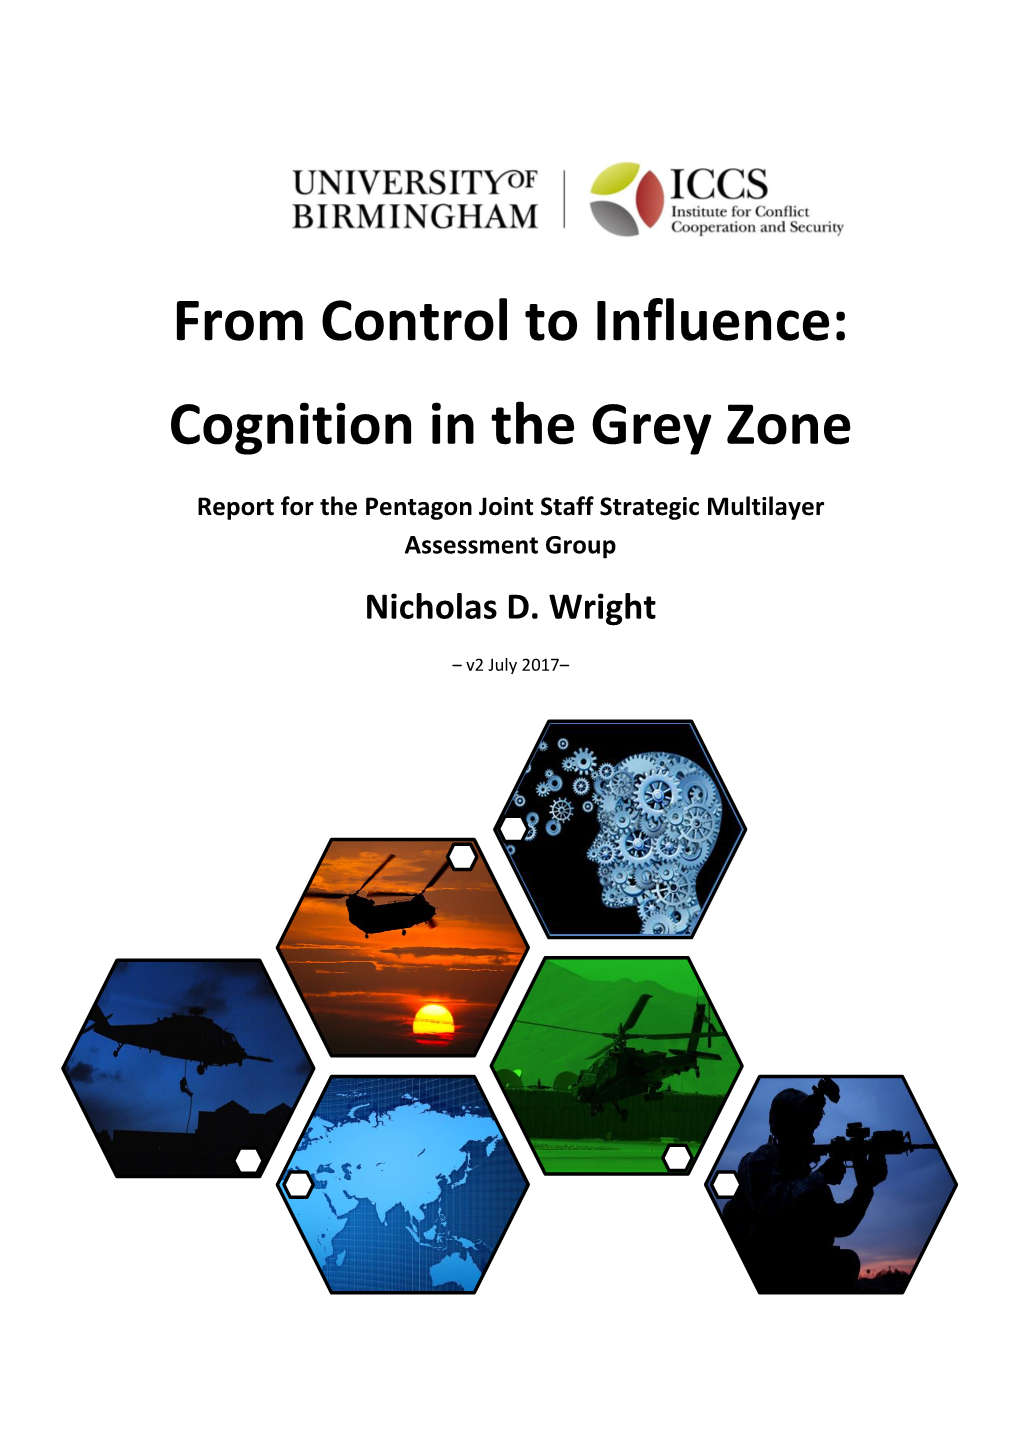 From Control to Influence: Cognition in the Grey Zone